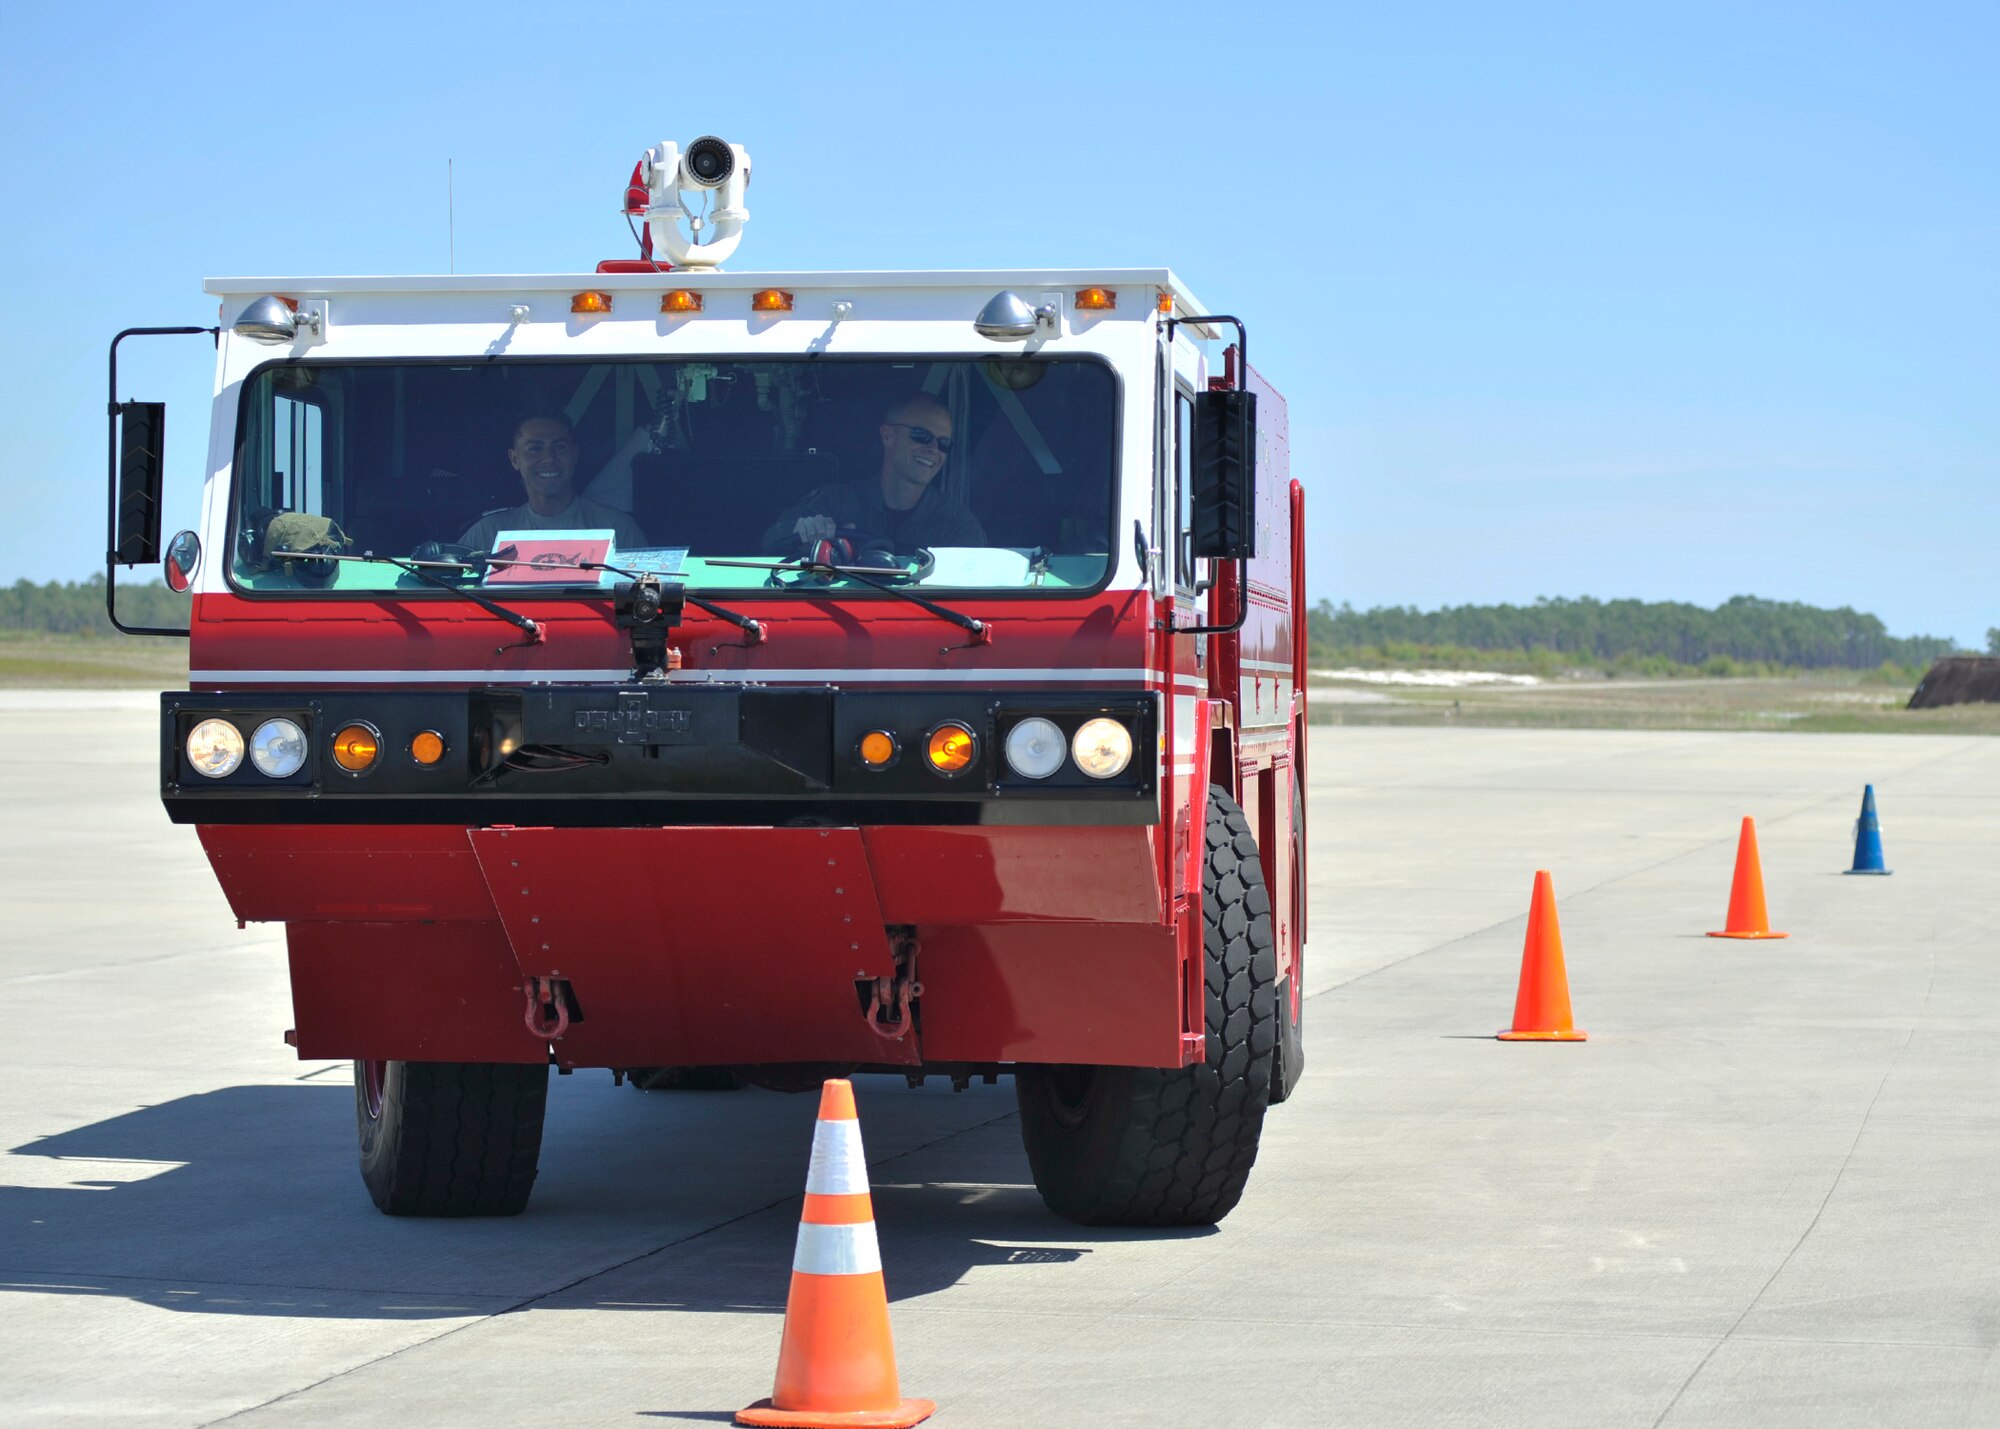 Colonel Derek C. France, 325th Fighter Wing commander, drives a P-19 Crash Truck through an obstacle course April 8 by the Tyndall Air Force Base, Fla., flightline. France was shadowing Staff Sgt. Jacob Banuelos, 325th Civil Engineer Squadron lead firefighter, as part of the Airman Shadow Program. (U.S. Air Force photo by Senior Airman Sergio A. Gamboa/Released)